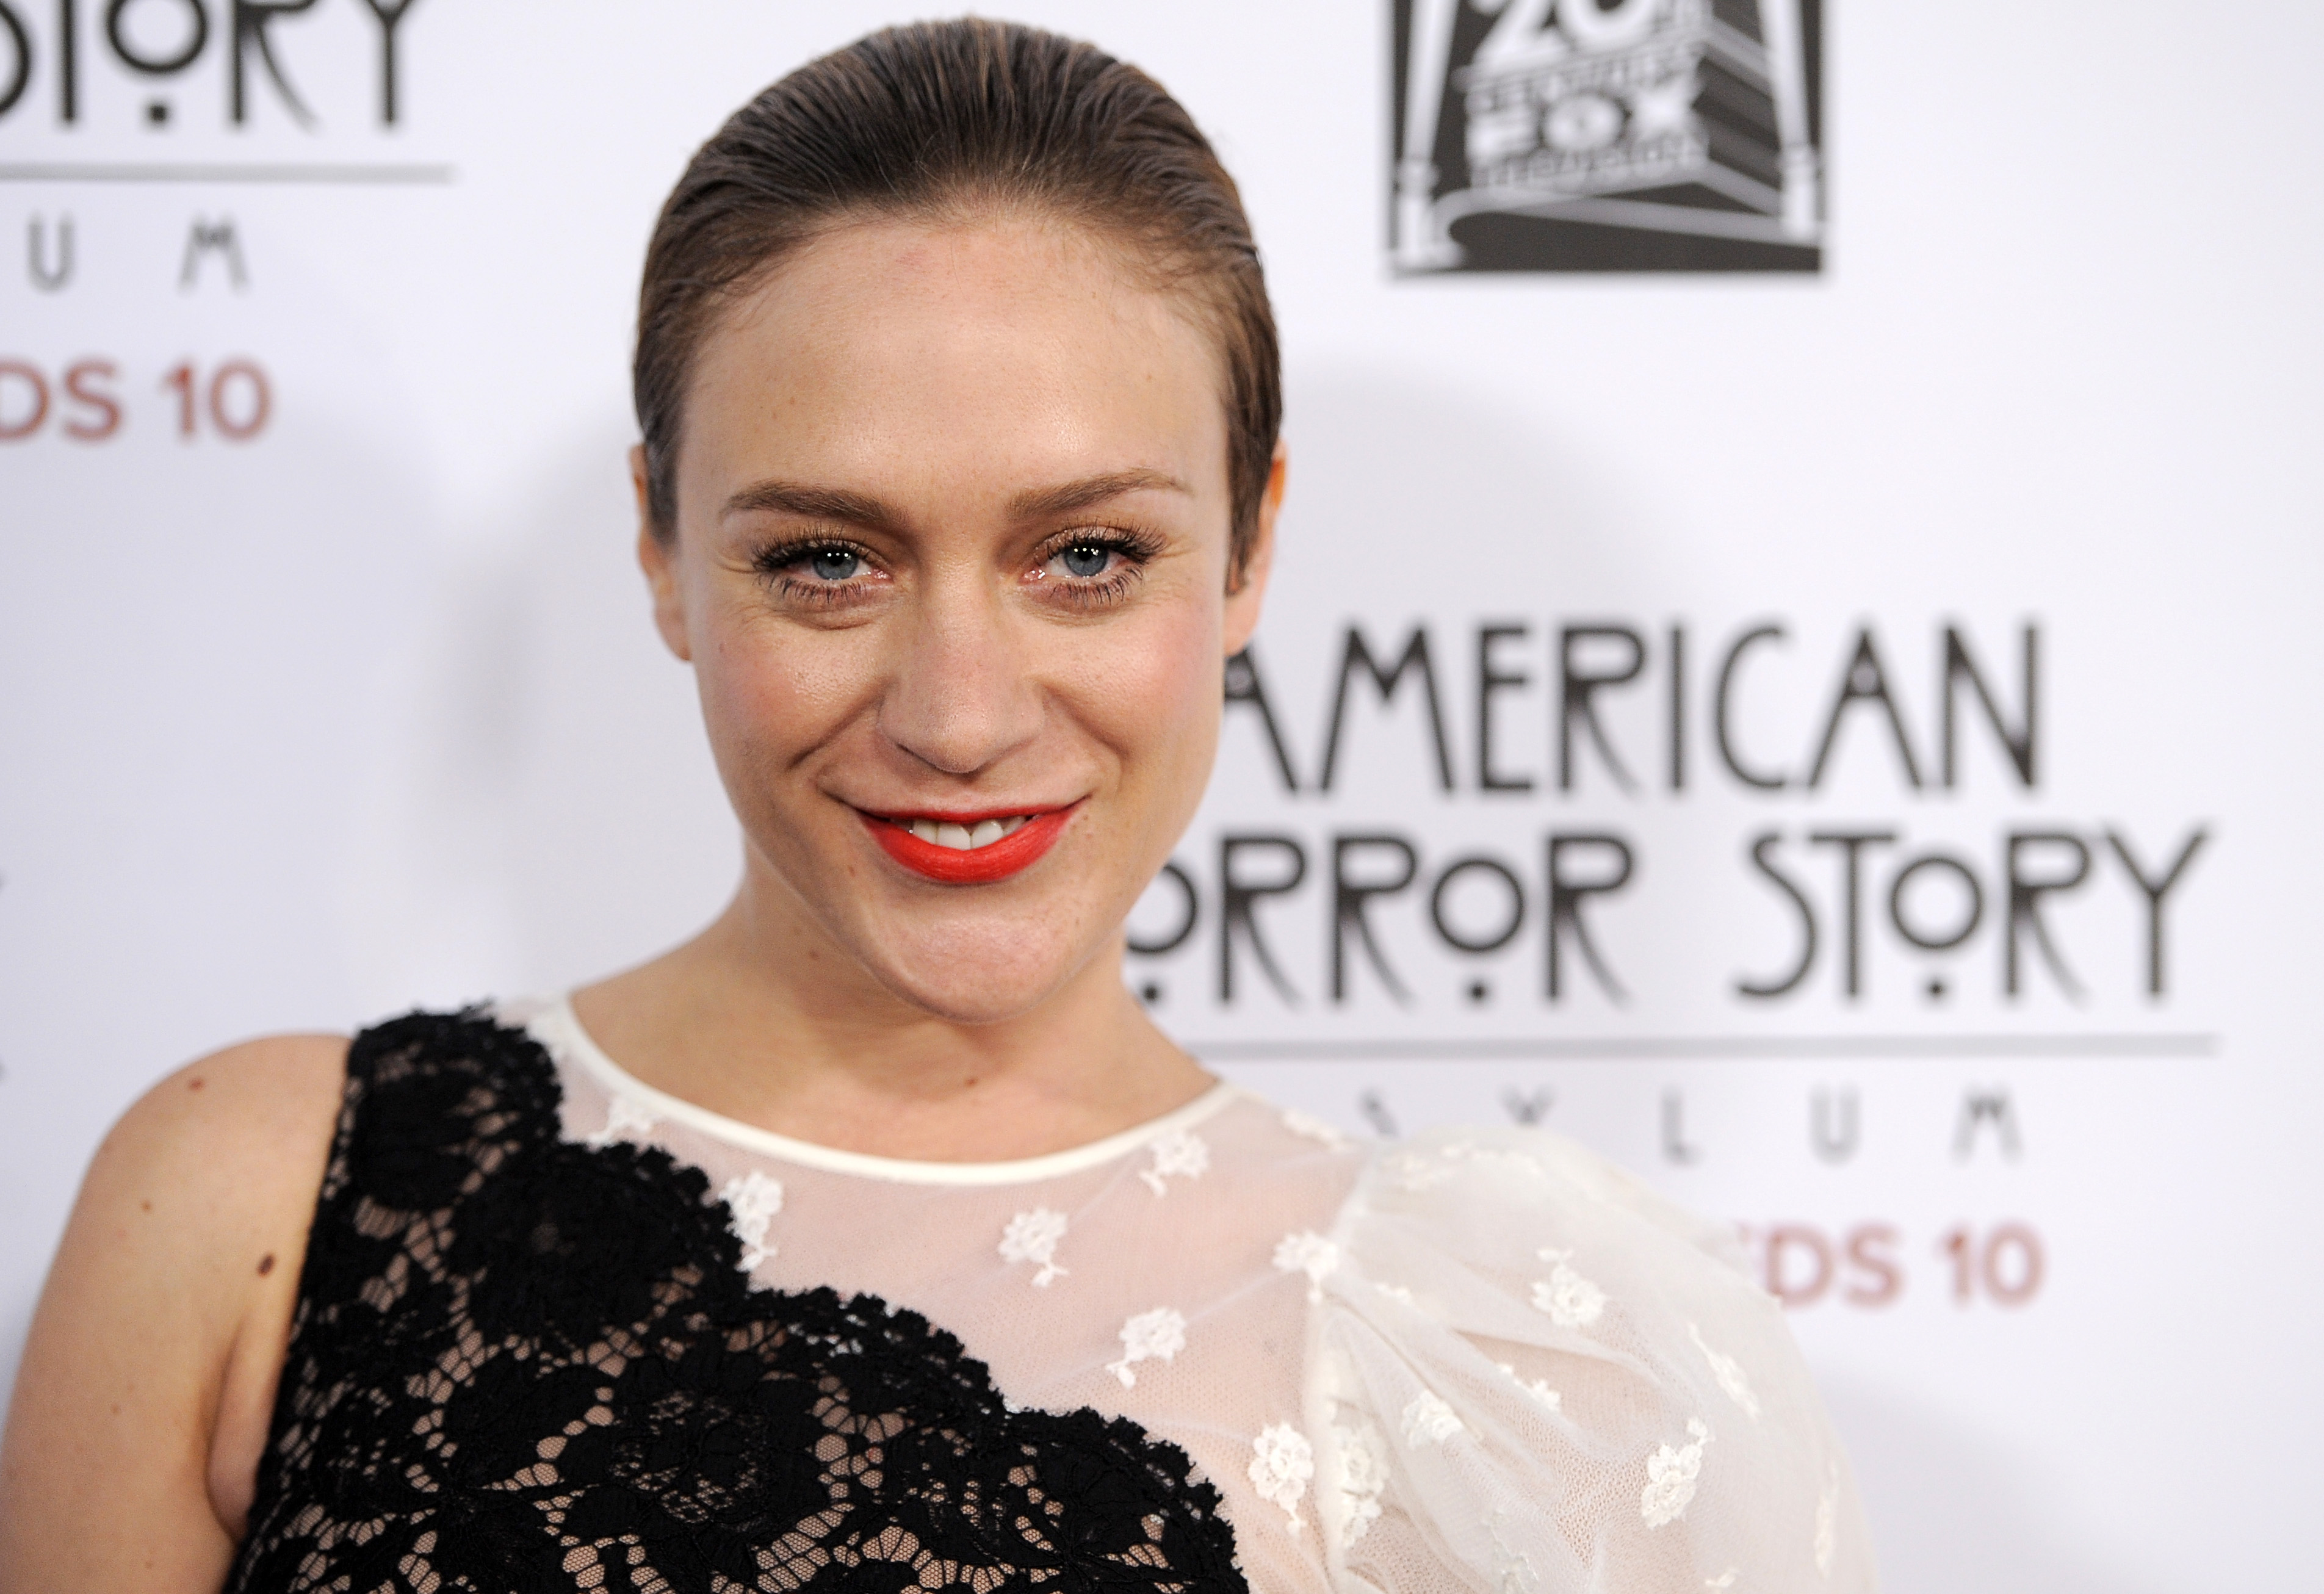 Chloe Sevigny poses at the premiere screening of "American Horror Story: Asylum" in Los Angeles on Oct. 13, 2012. (Chris Pizzello—AP)